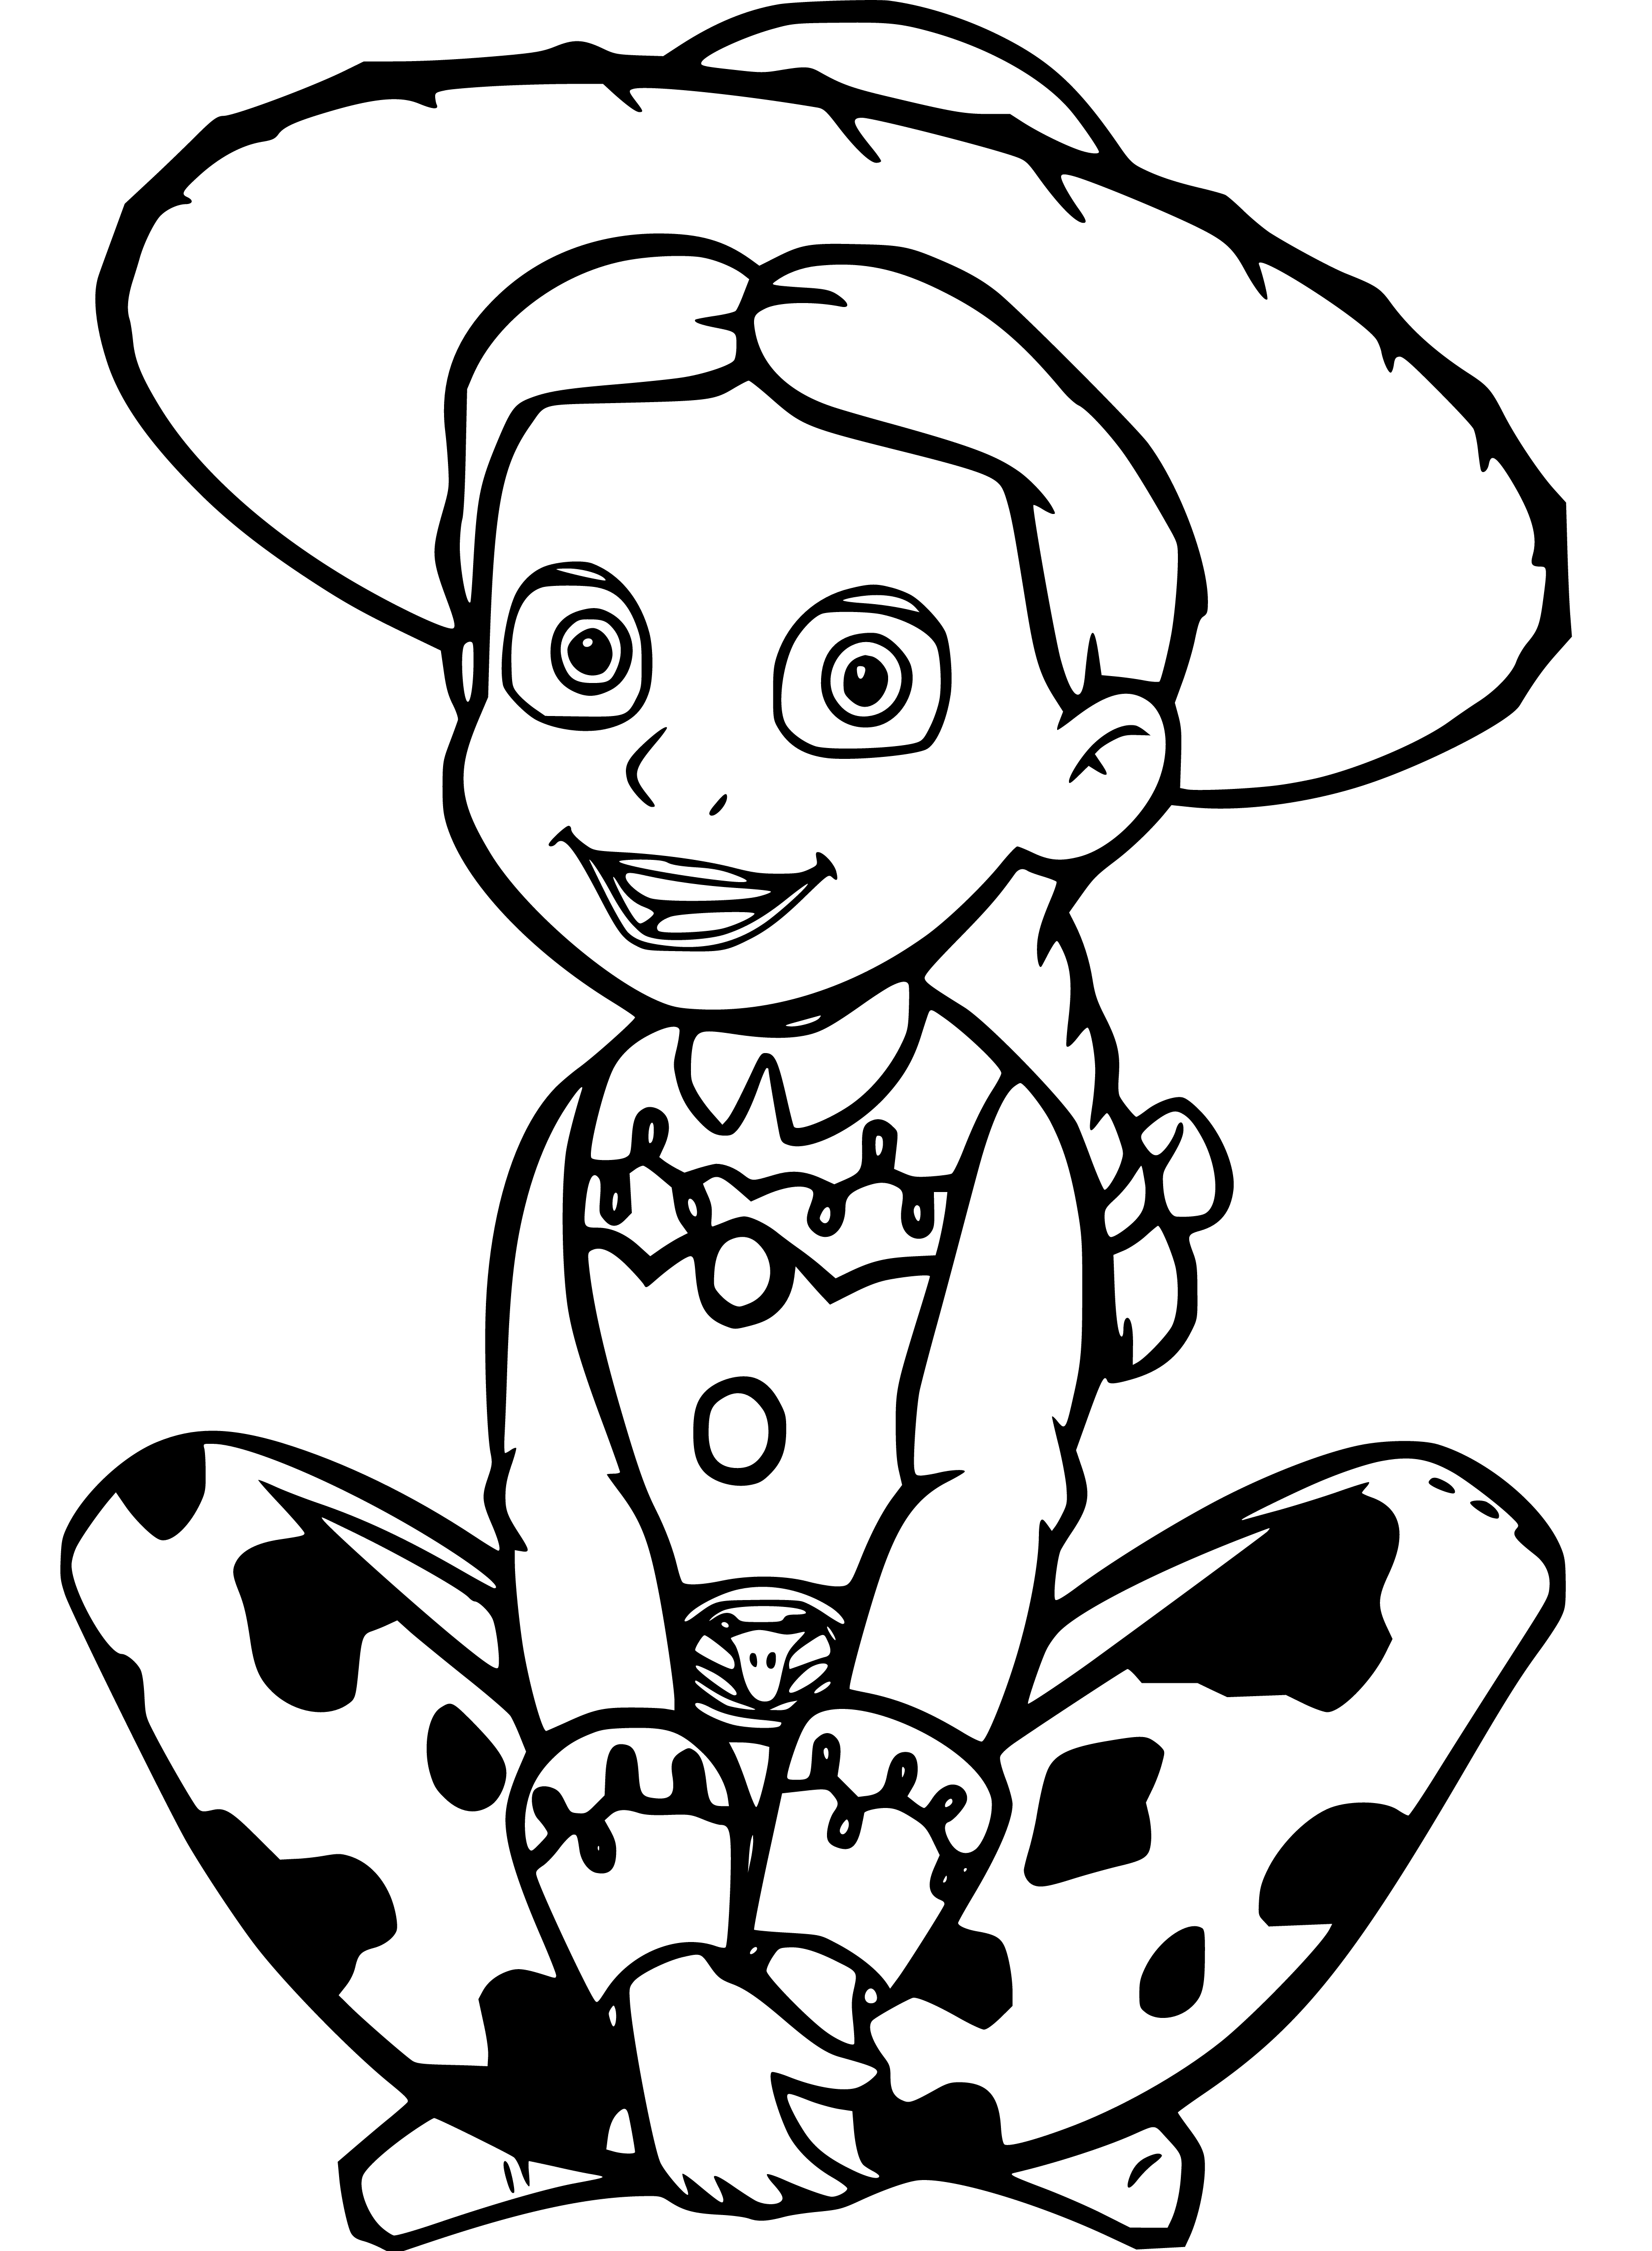 Printable Toy Story's Jessie Coloring Page for kids.